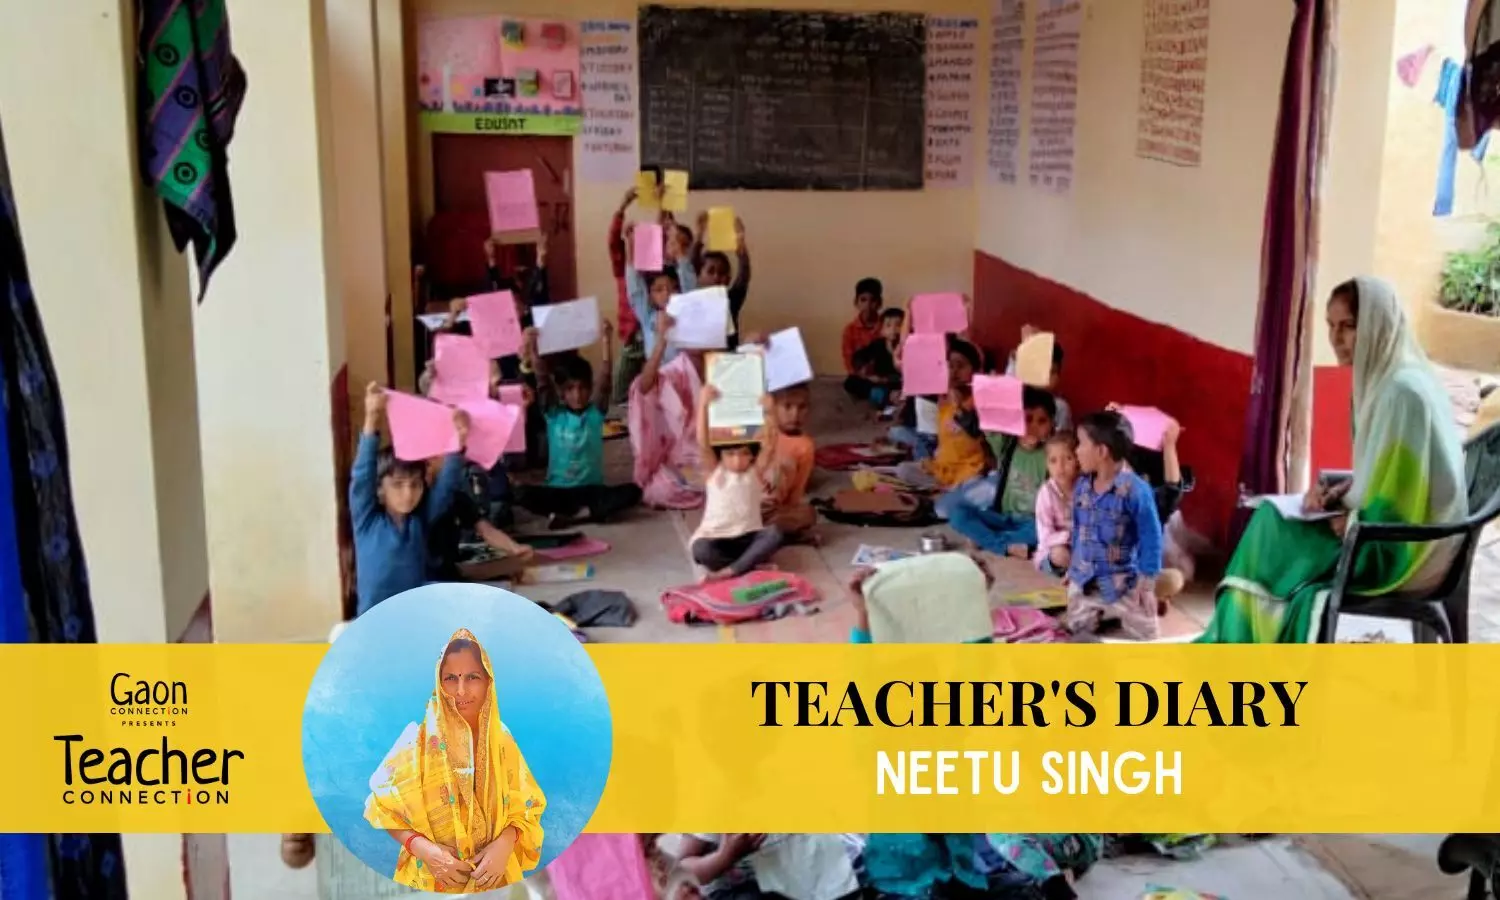 Teacher’s Diary: “I stitched together cement bags to use as durries in the classroom”